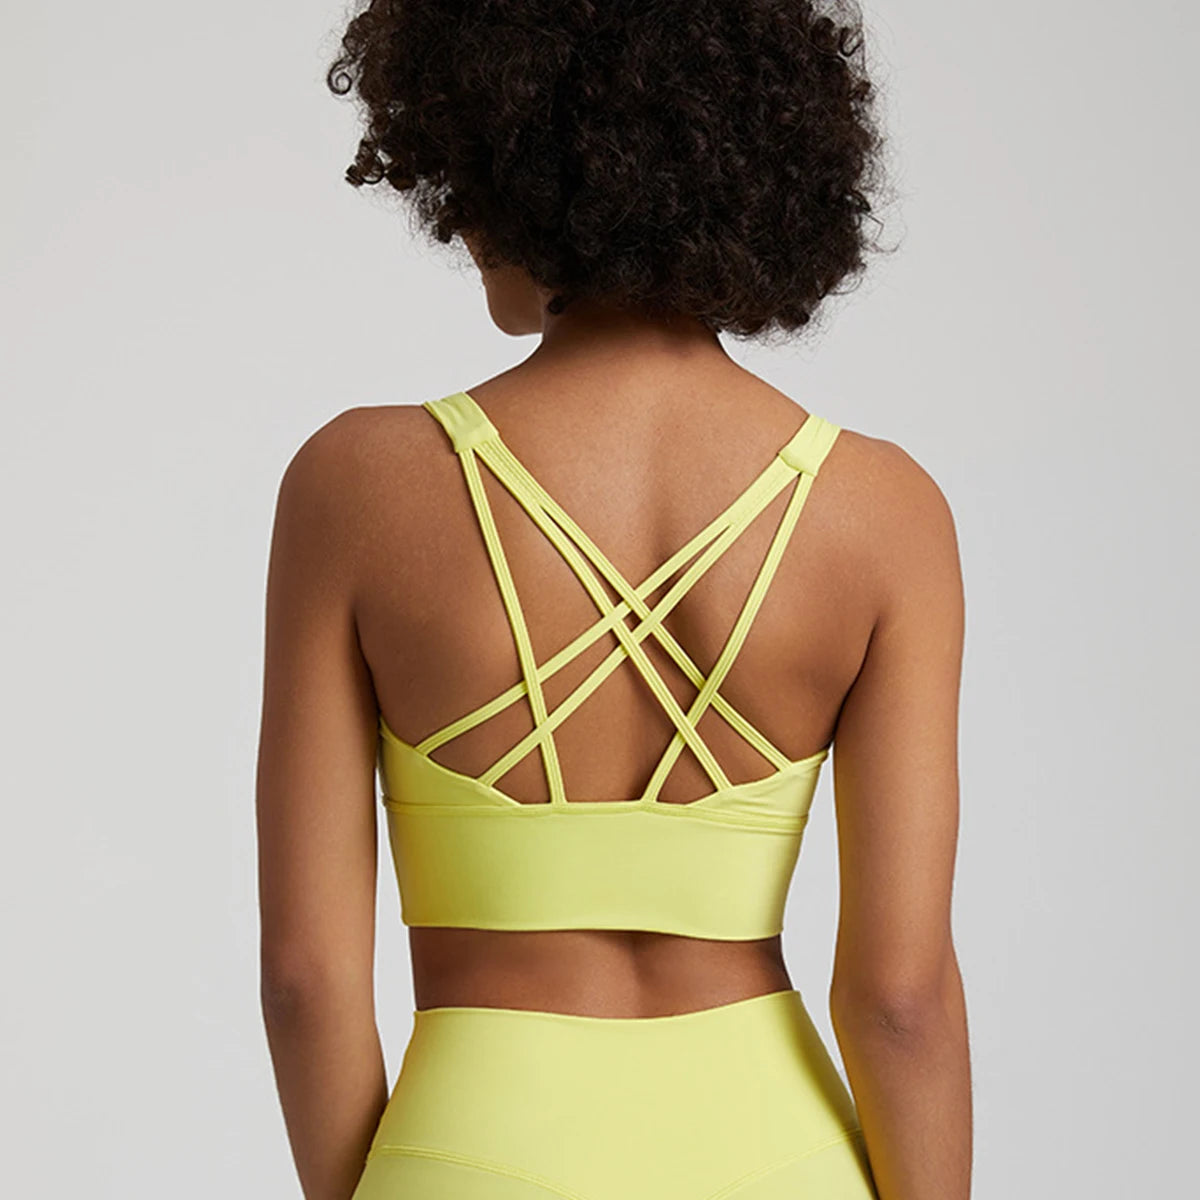 Back View of Lady in Our KeneChic Strappy Sport Bra